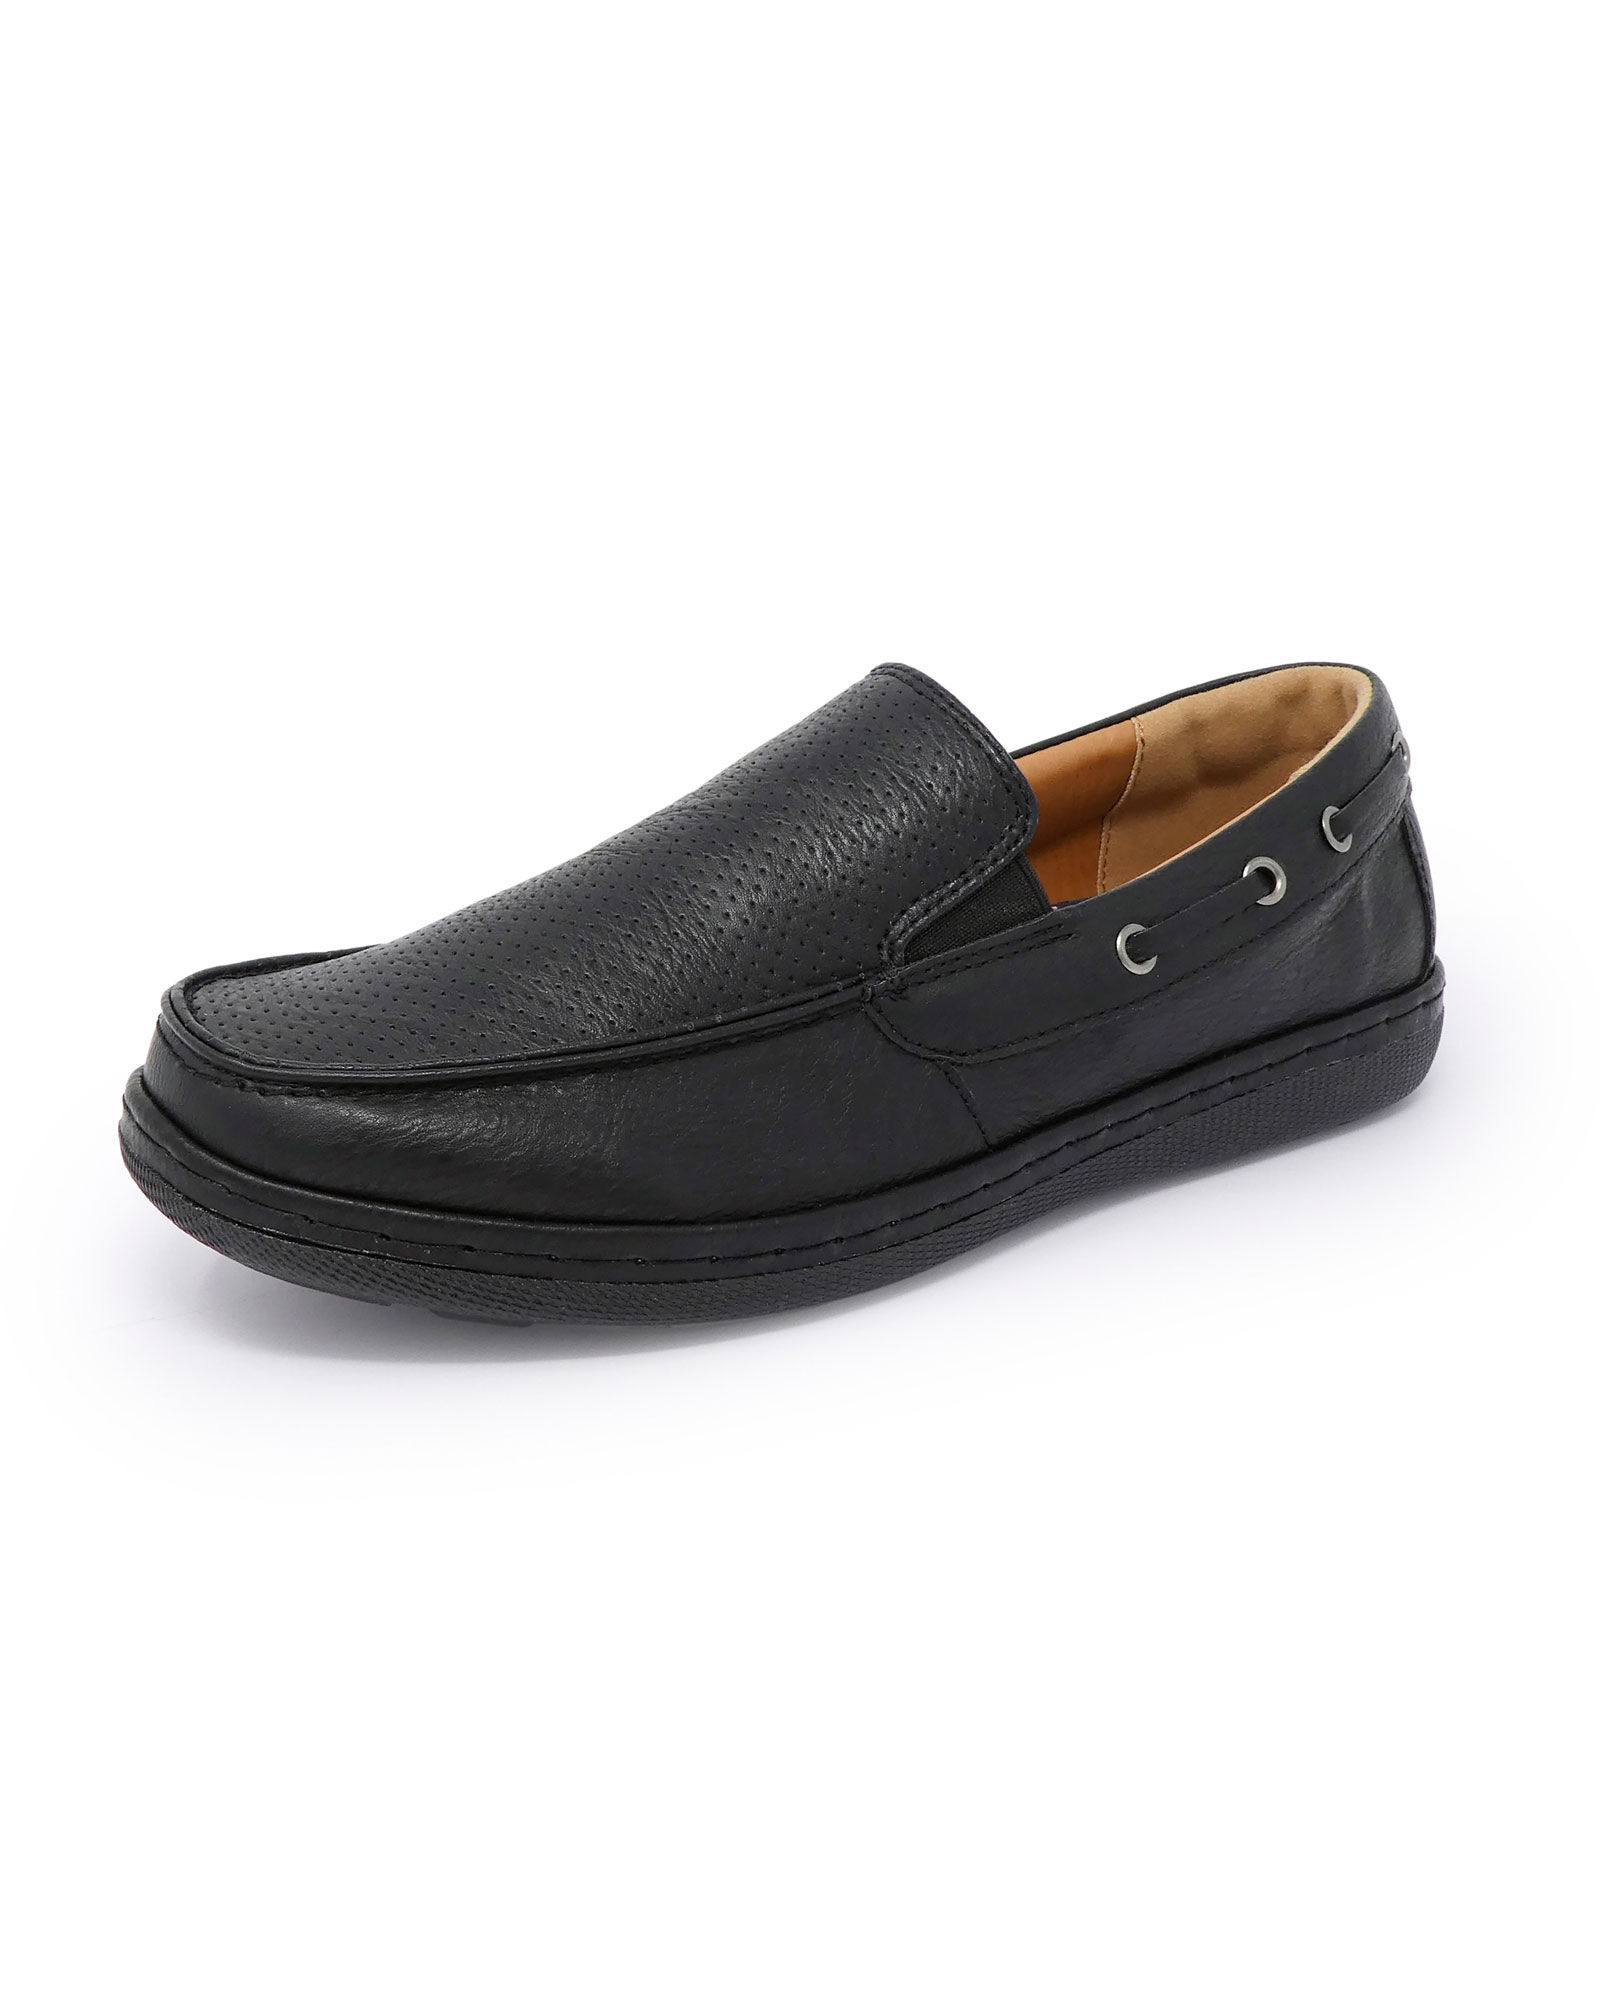 cotton traders mens slip on shoes